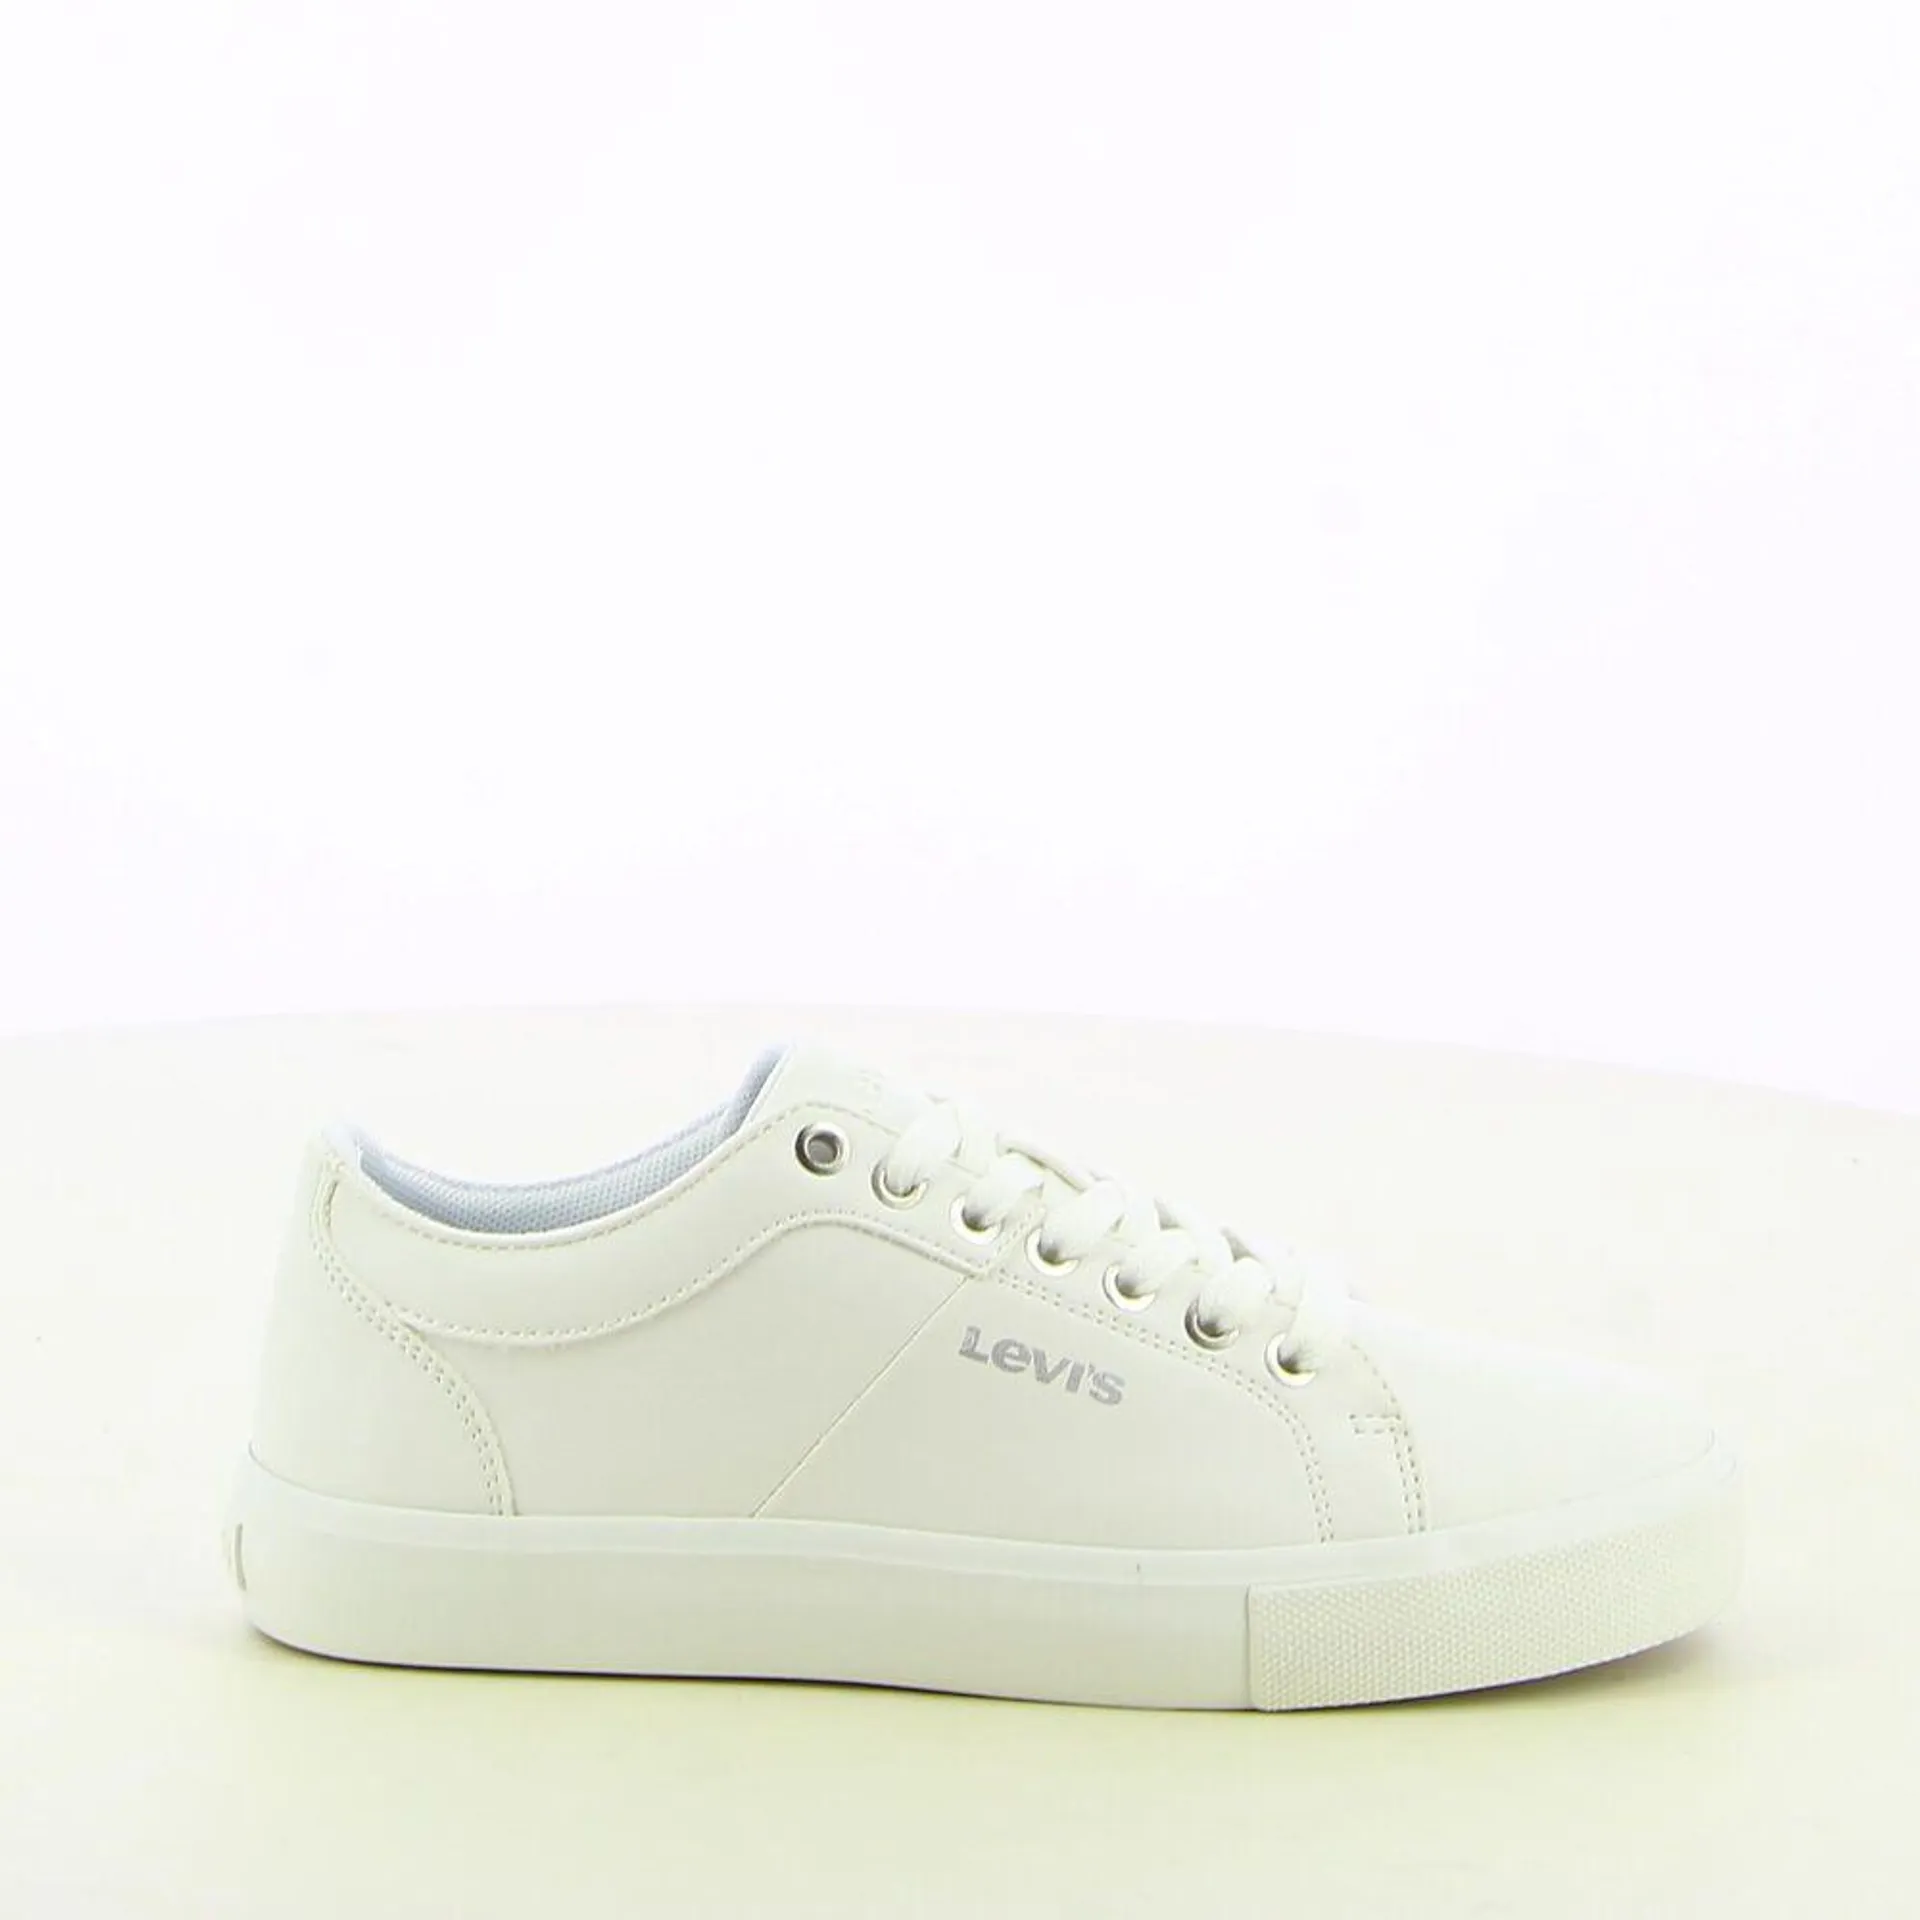 L'evis - Wit - Sneakers